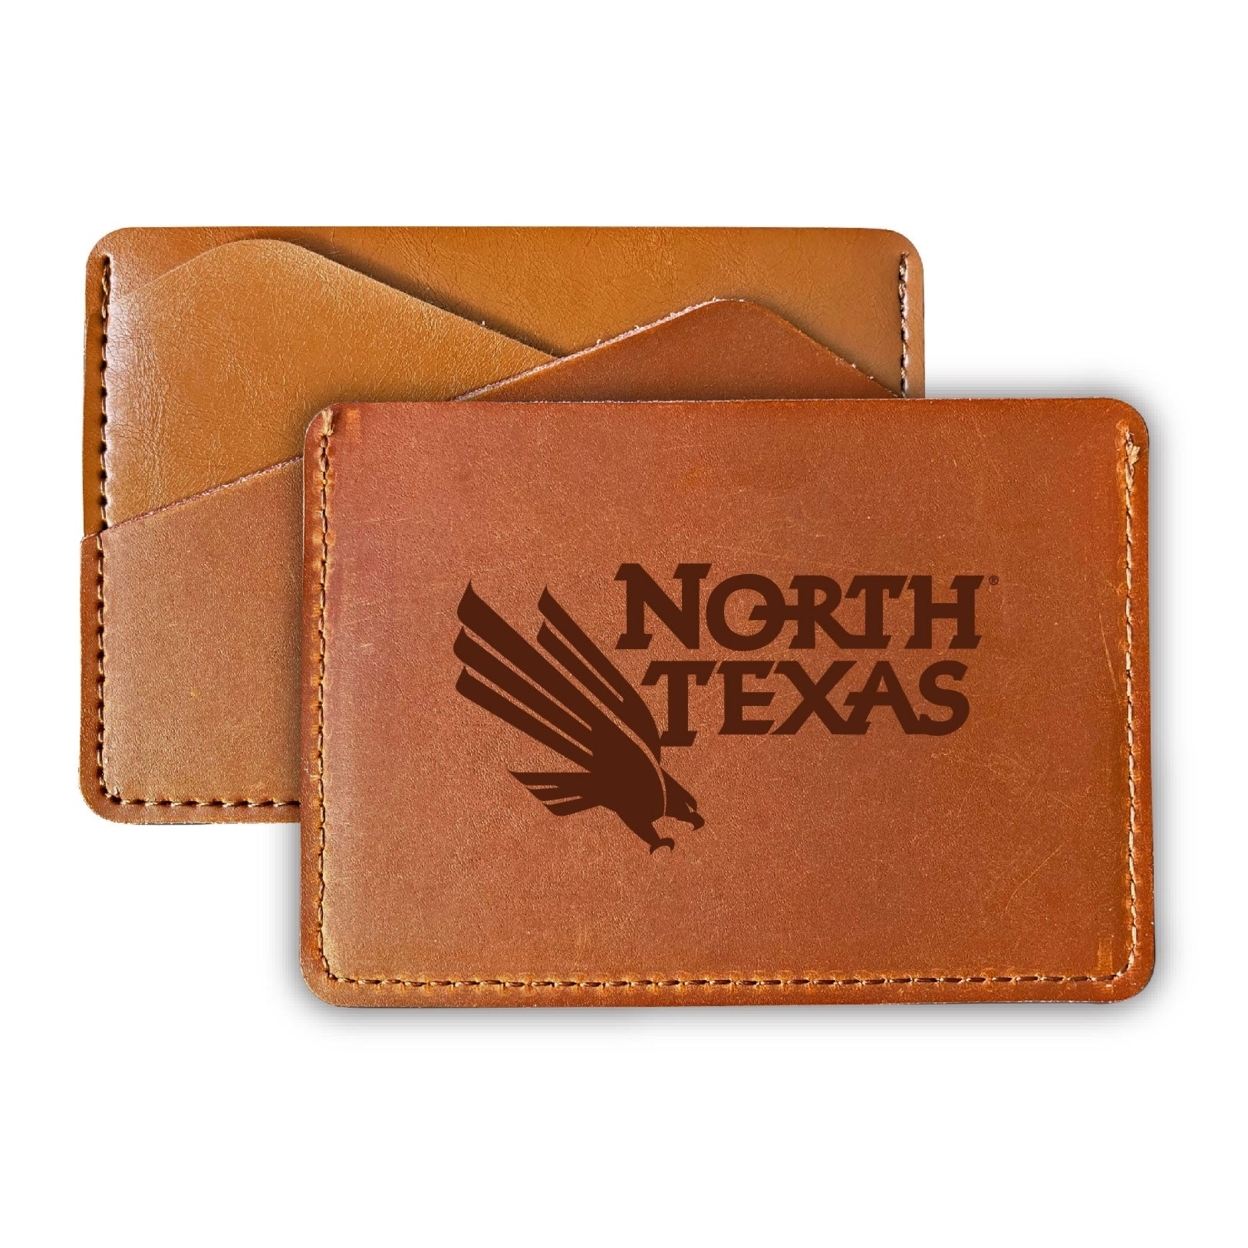 North Texas College Leather Card Holder Wallet